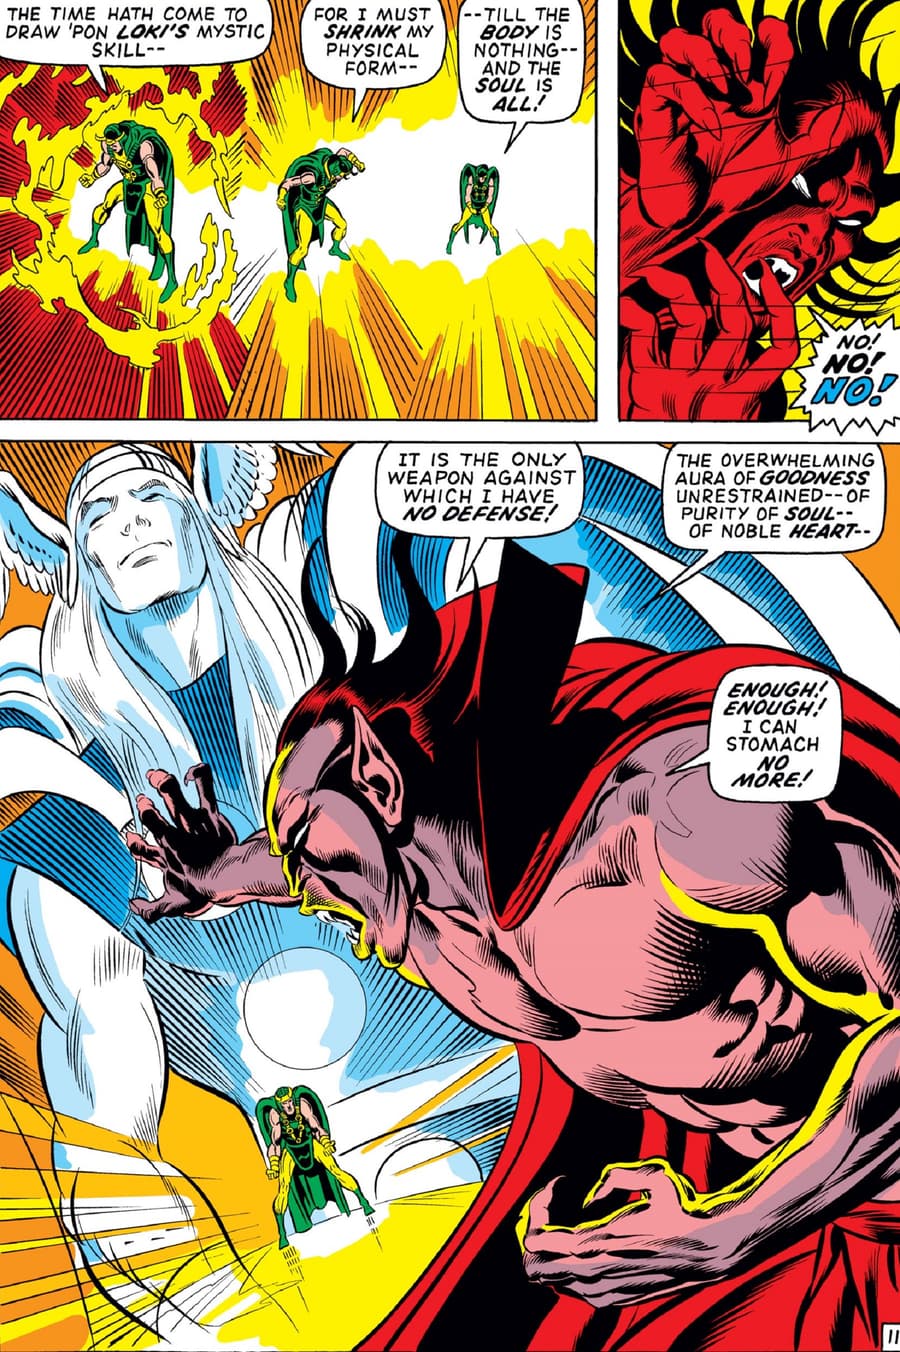 Thor parts with his body in THOR (1966) #181.